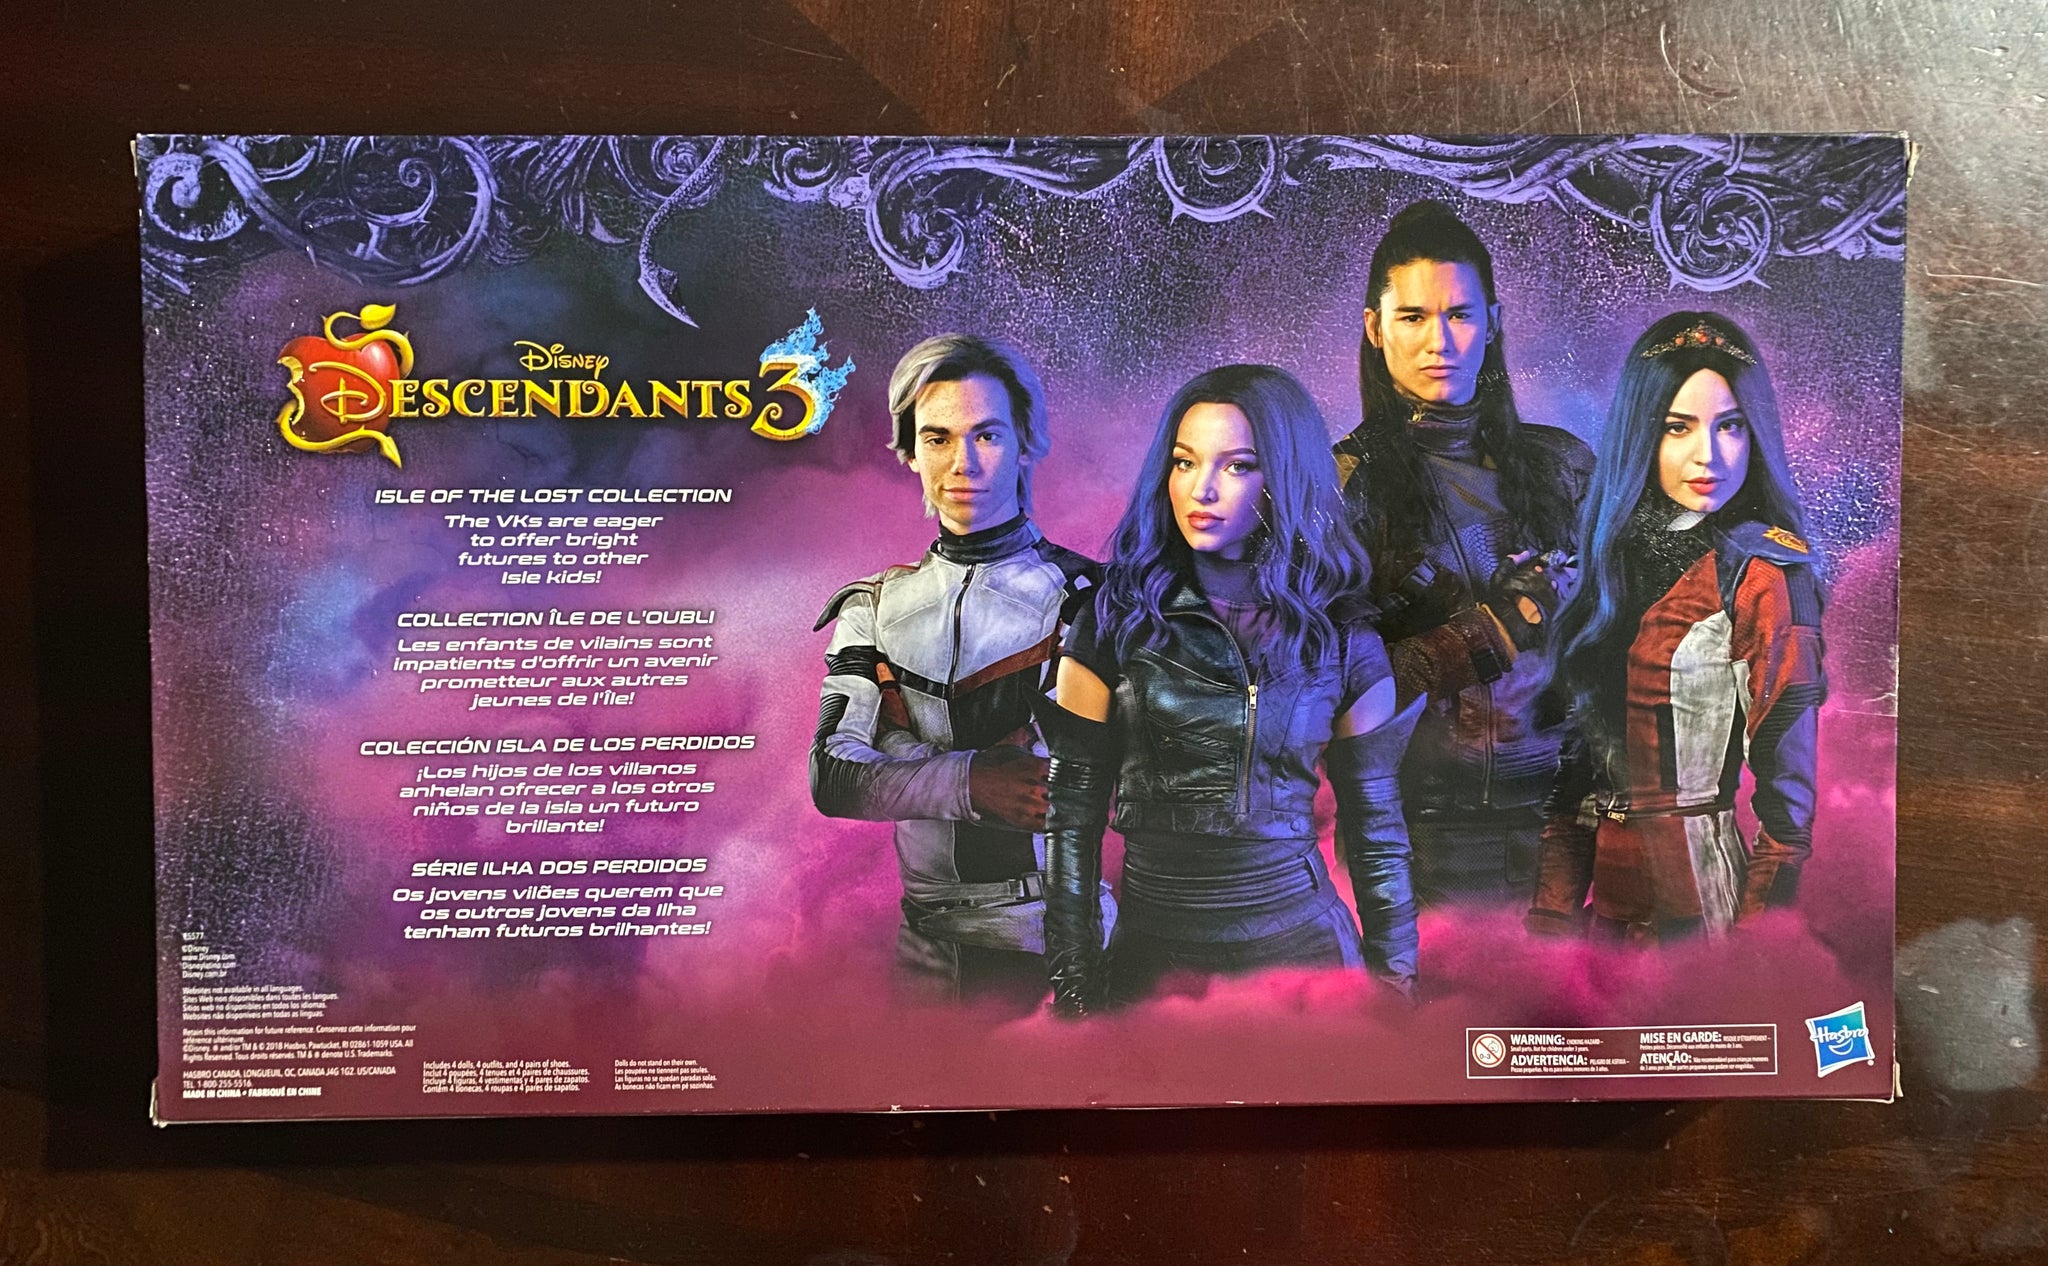  Disney Descendants 3 Isle of The Lost Collection 4 Pack Dolls :  Toys & Games